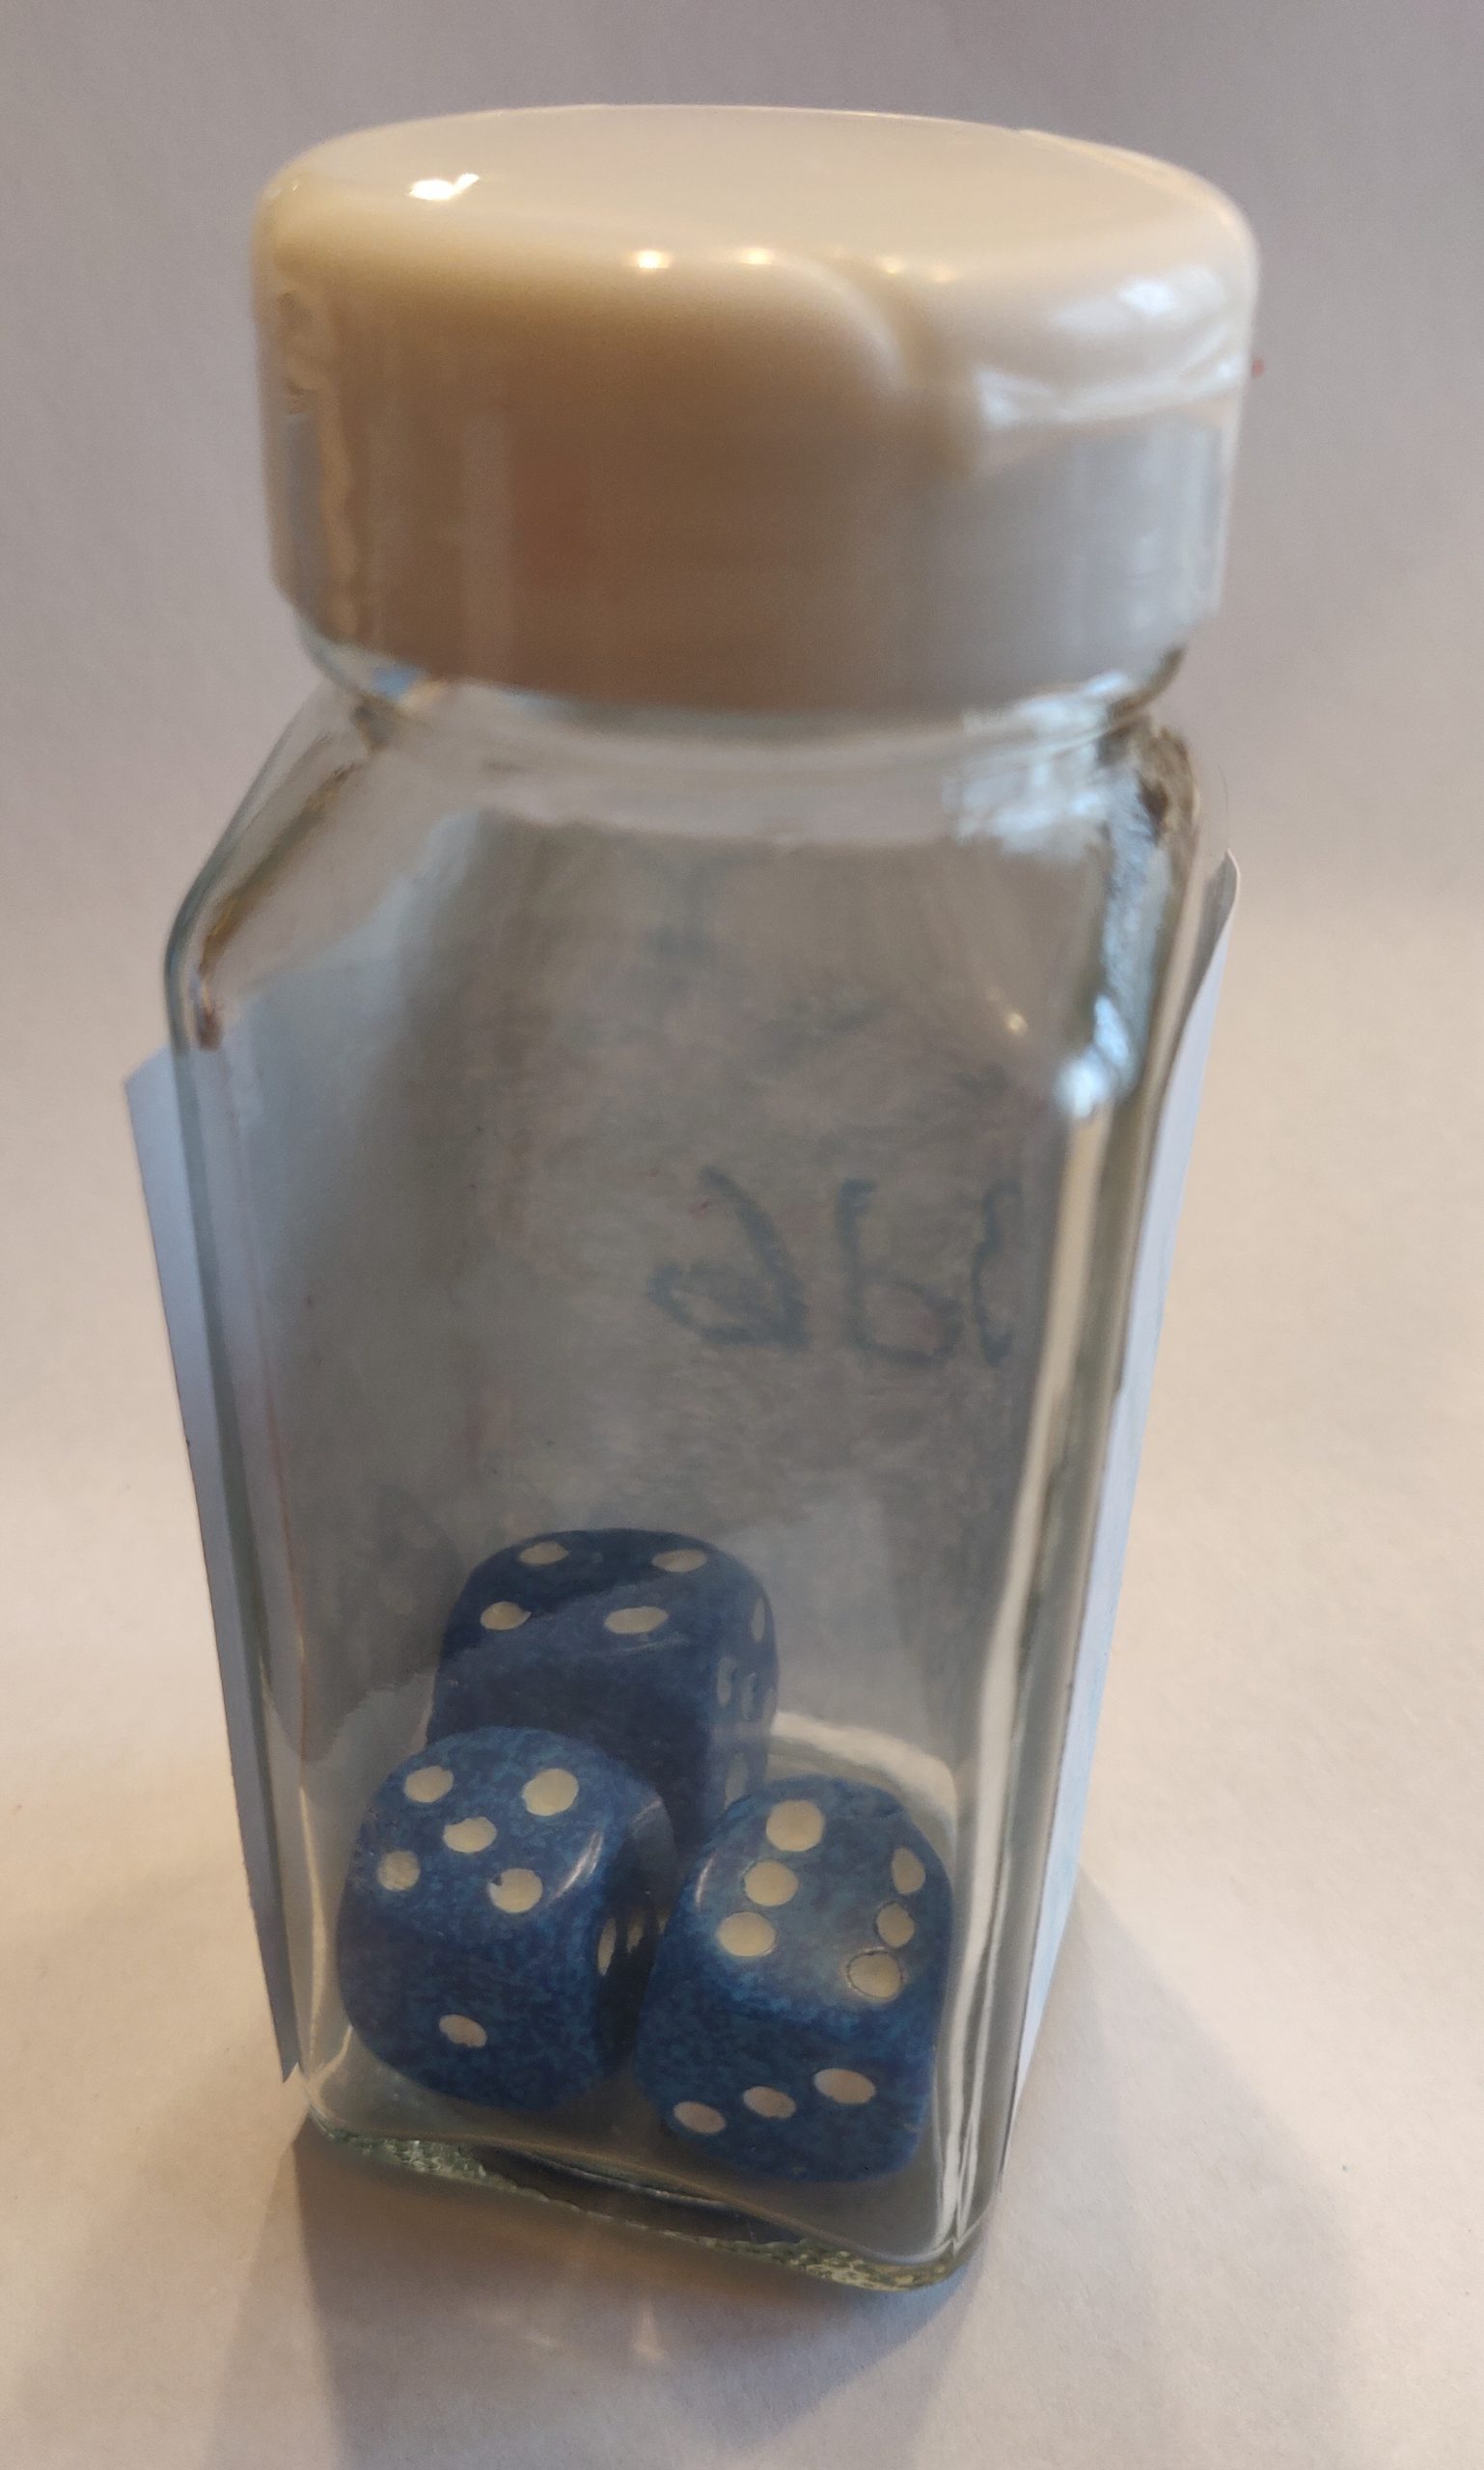 3d6 in container for a dice roller craft